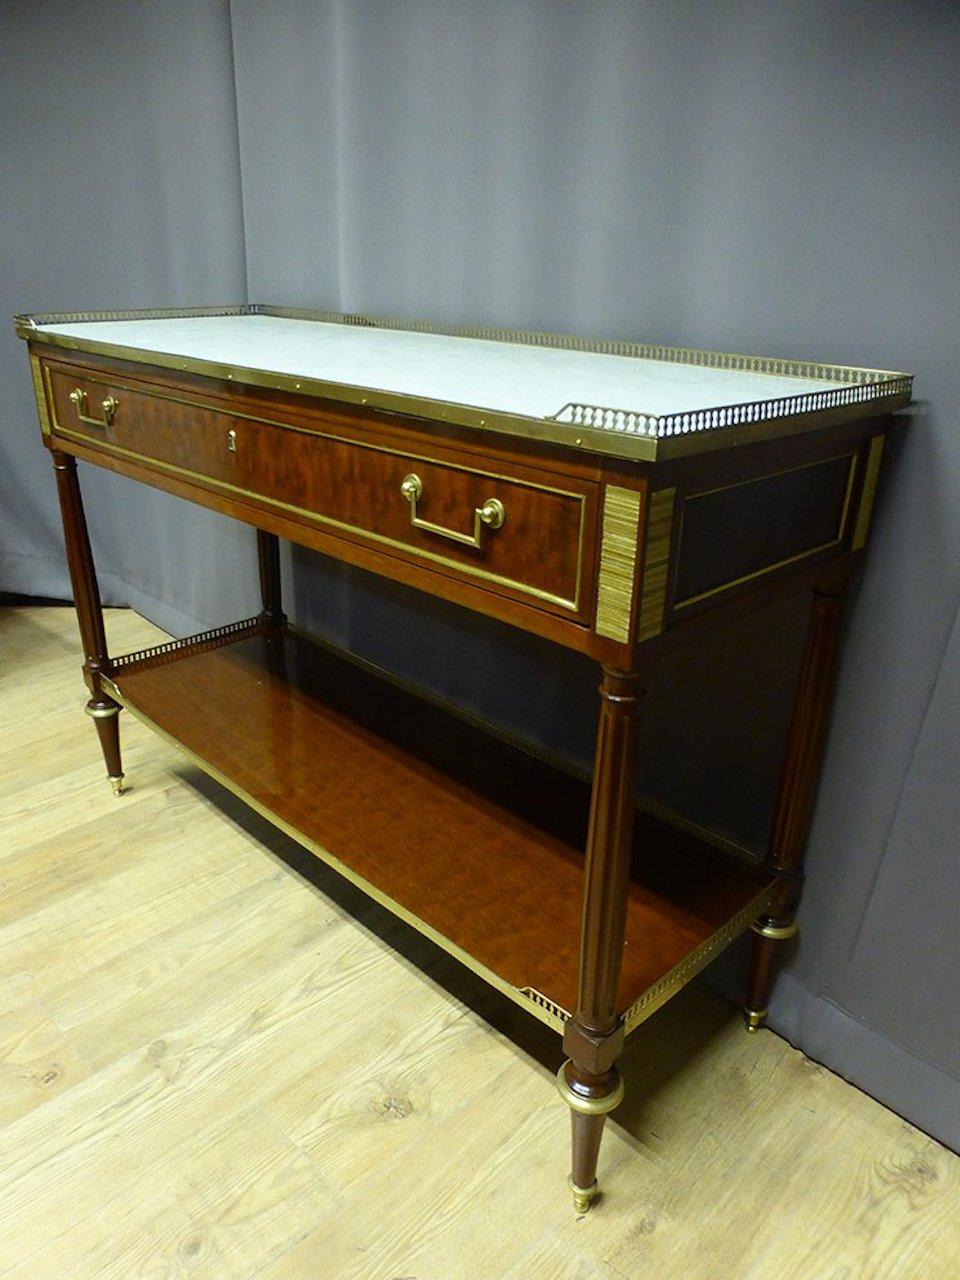 19th century mahogany and gilded bronze Louis XVI style console.
One large drawer. Gilded brass gallery and Carrara marble top.
Scraper gilded bronze. Beautiful quality.
 